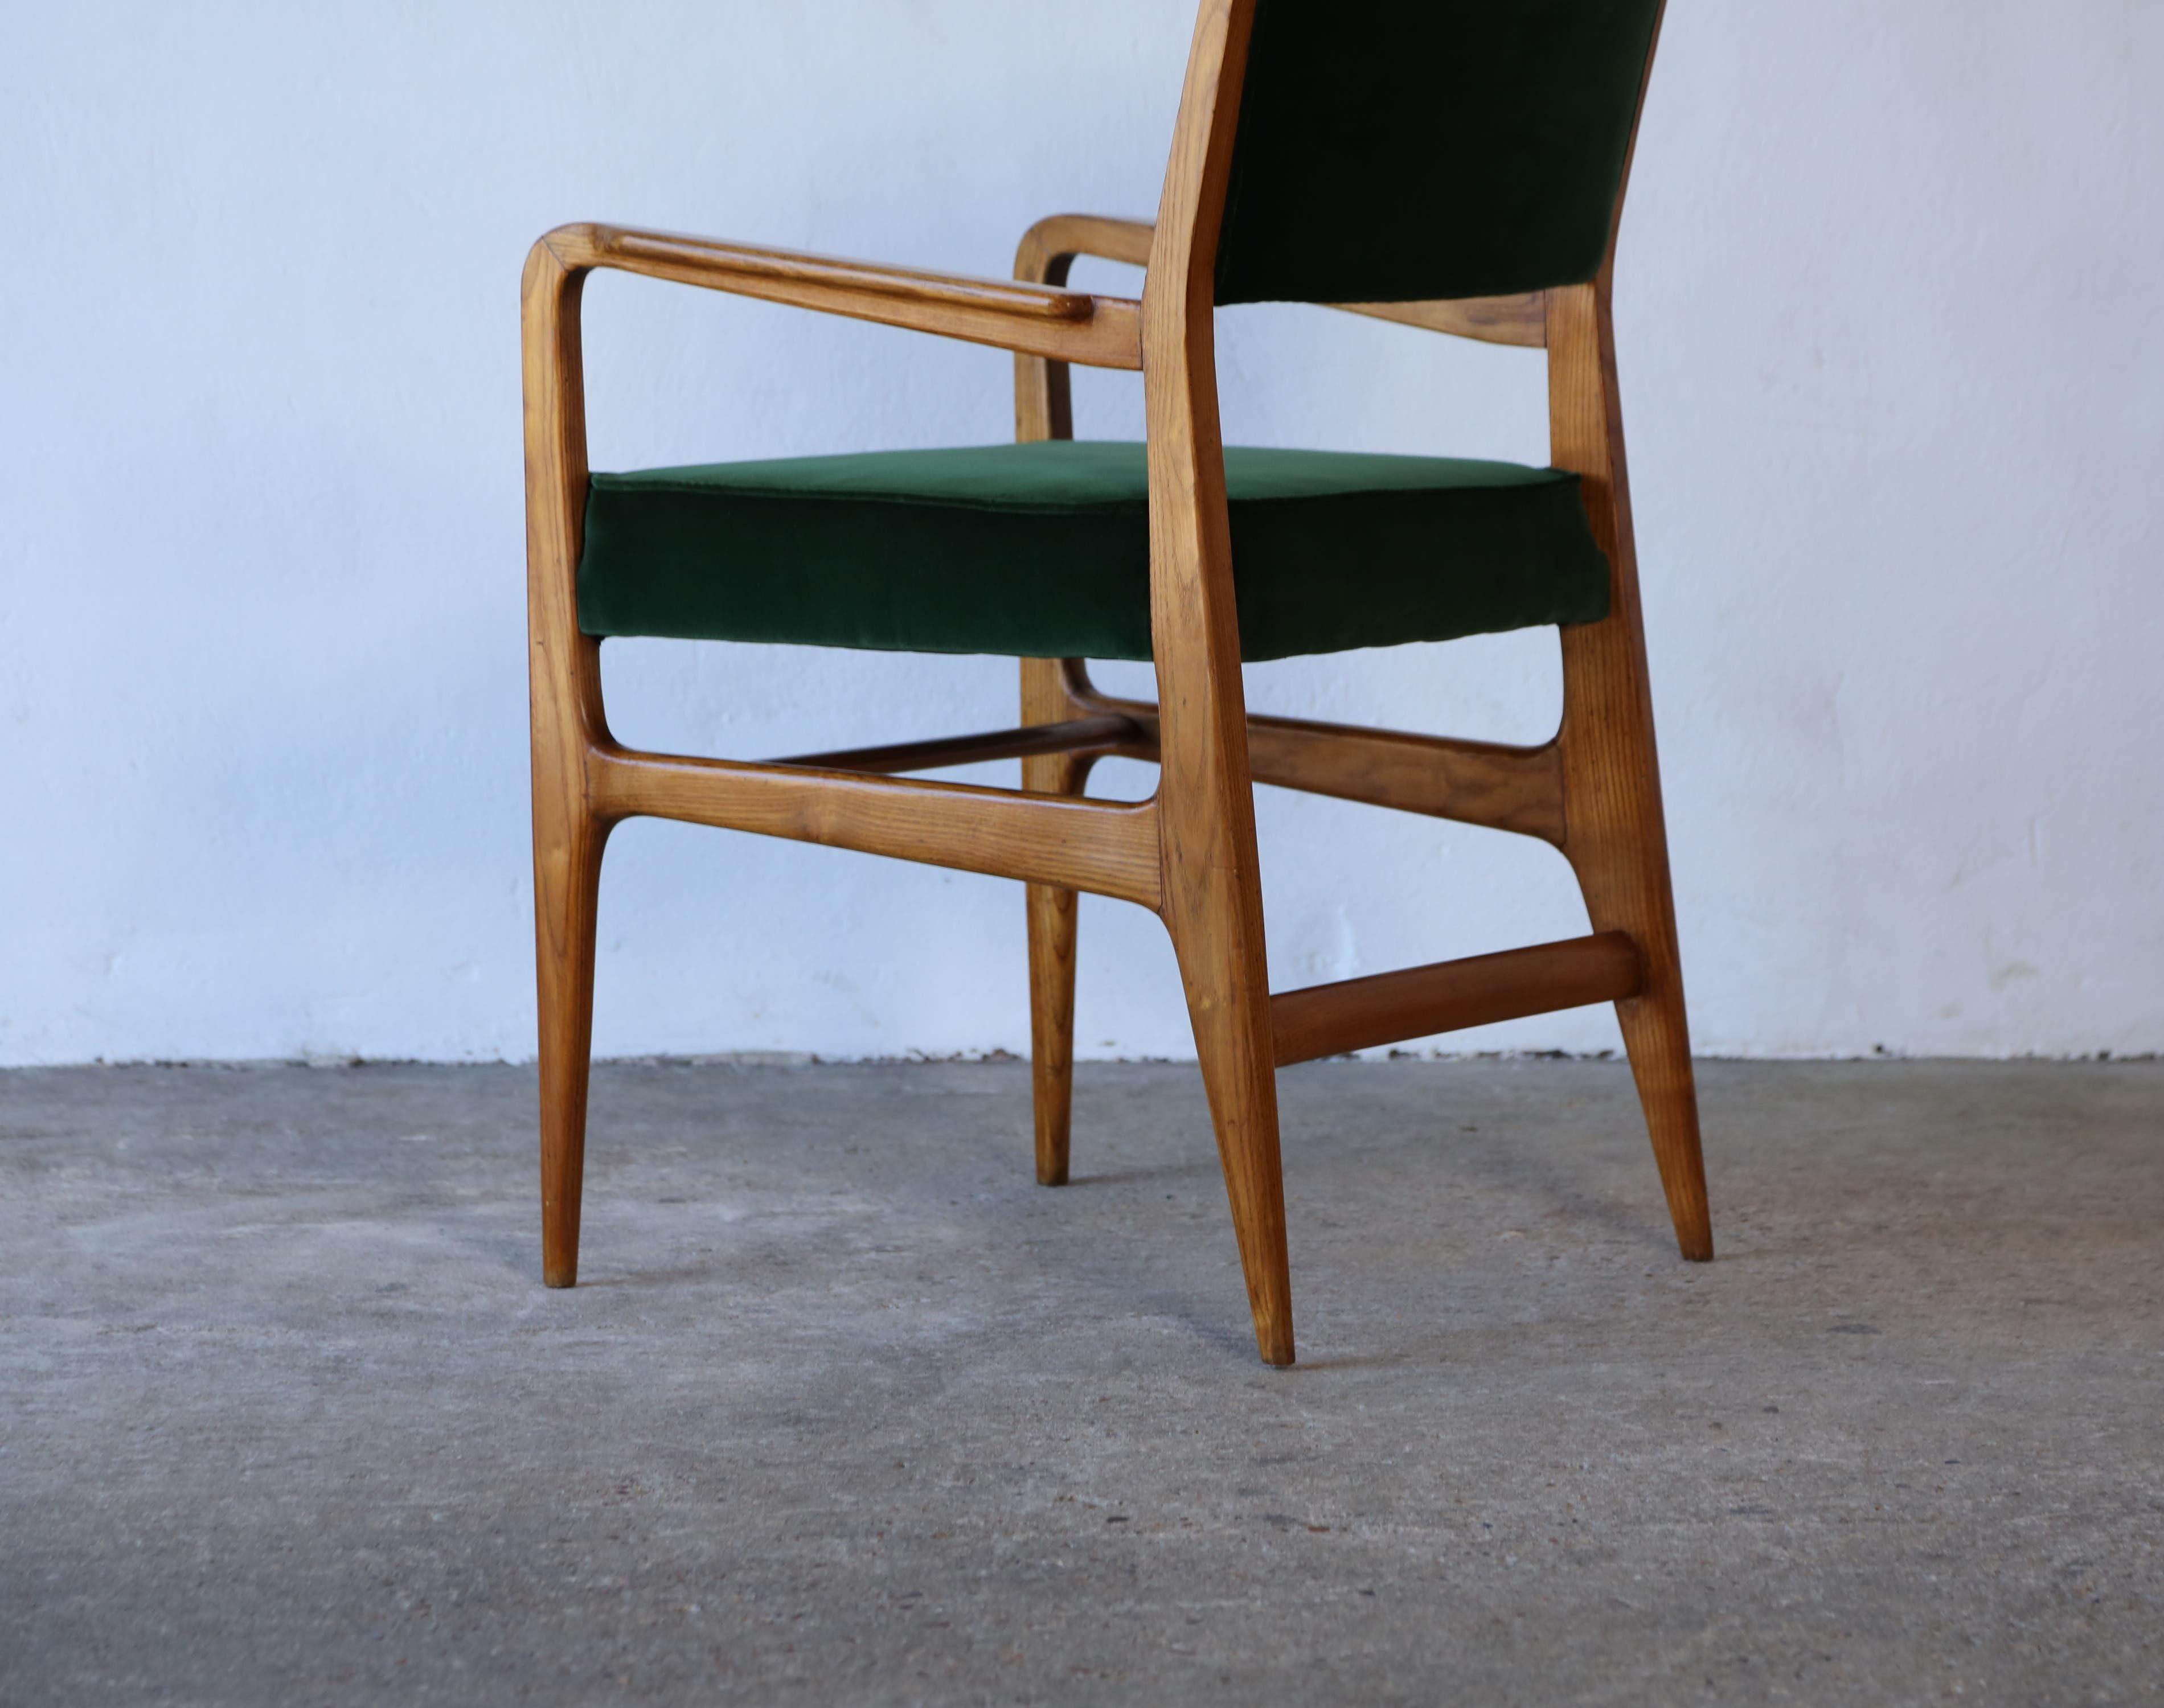 Rare Early Gio Ponti Chair, Giordano Chiesa, Italy, 1950s For Sale 2